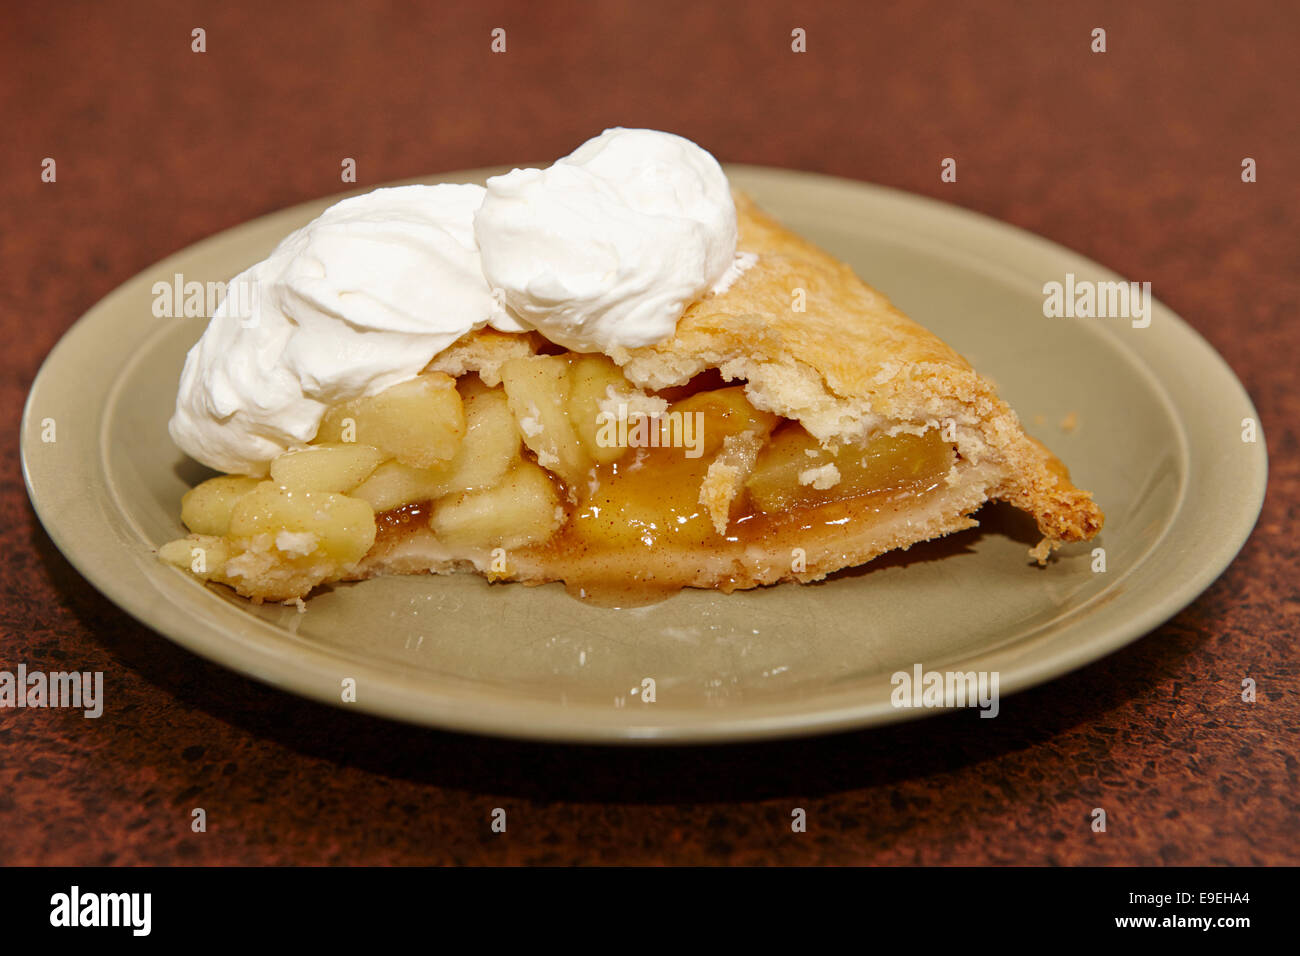 large slice of mass produced apple pie with whipped cream topping Stock Photo